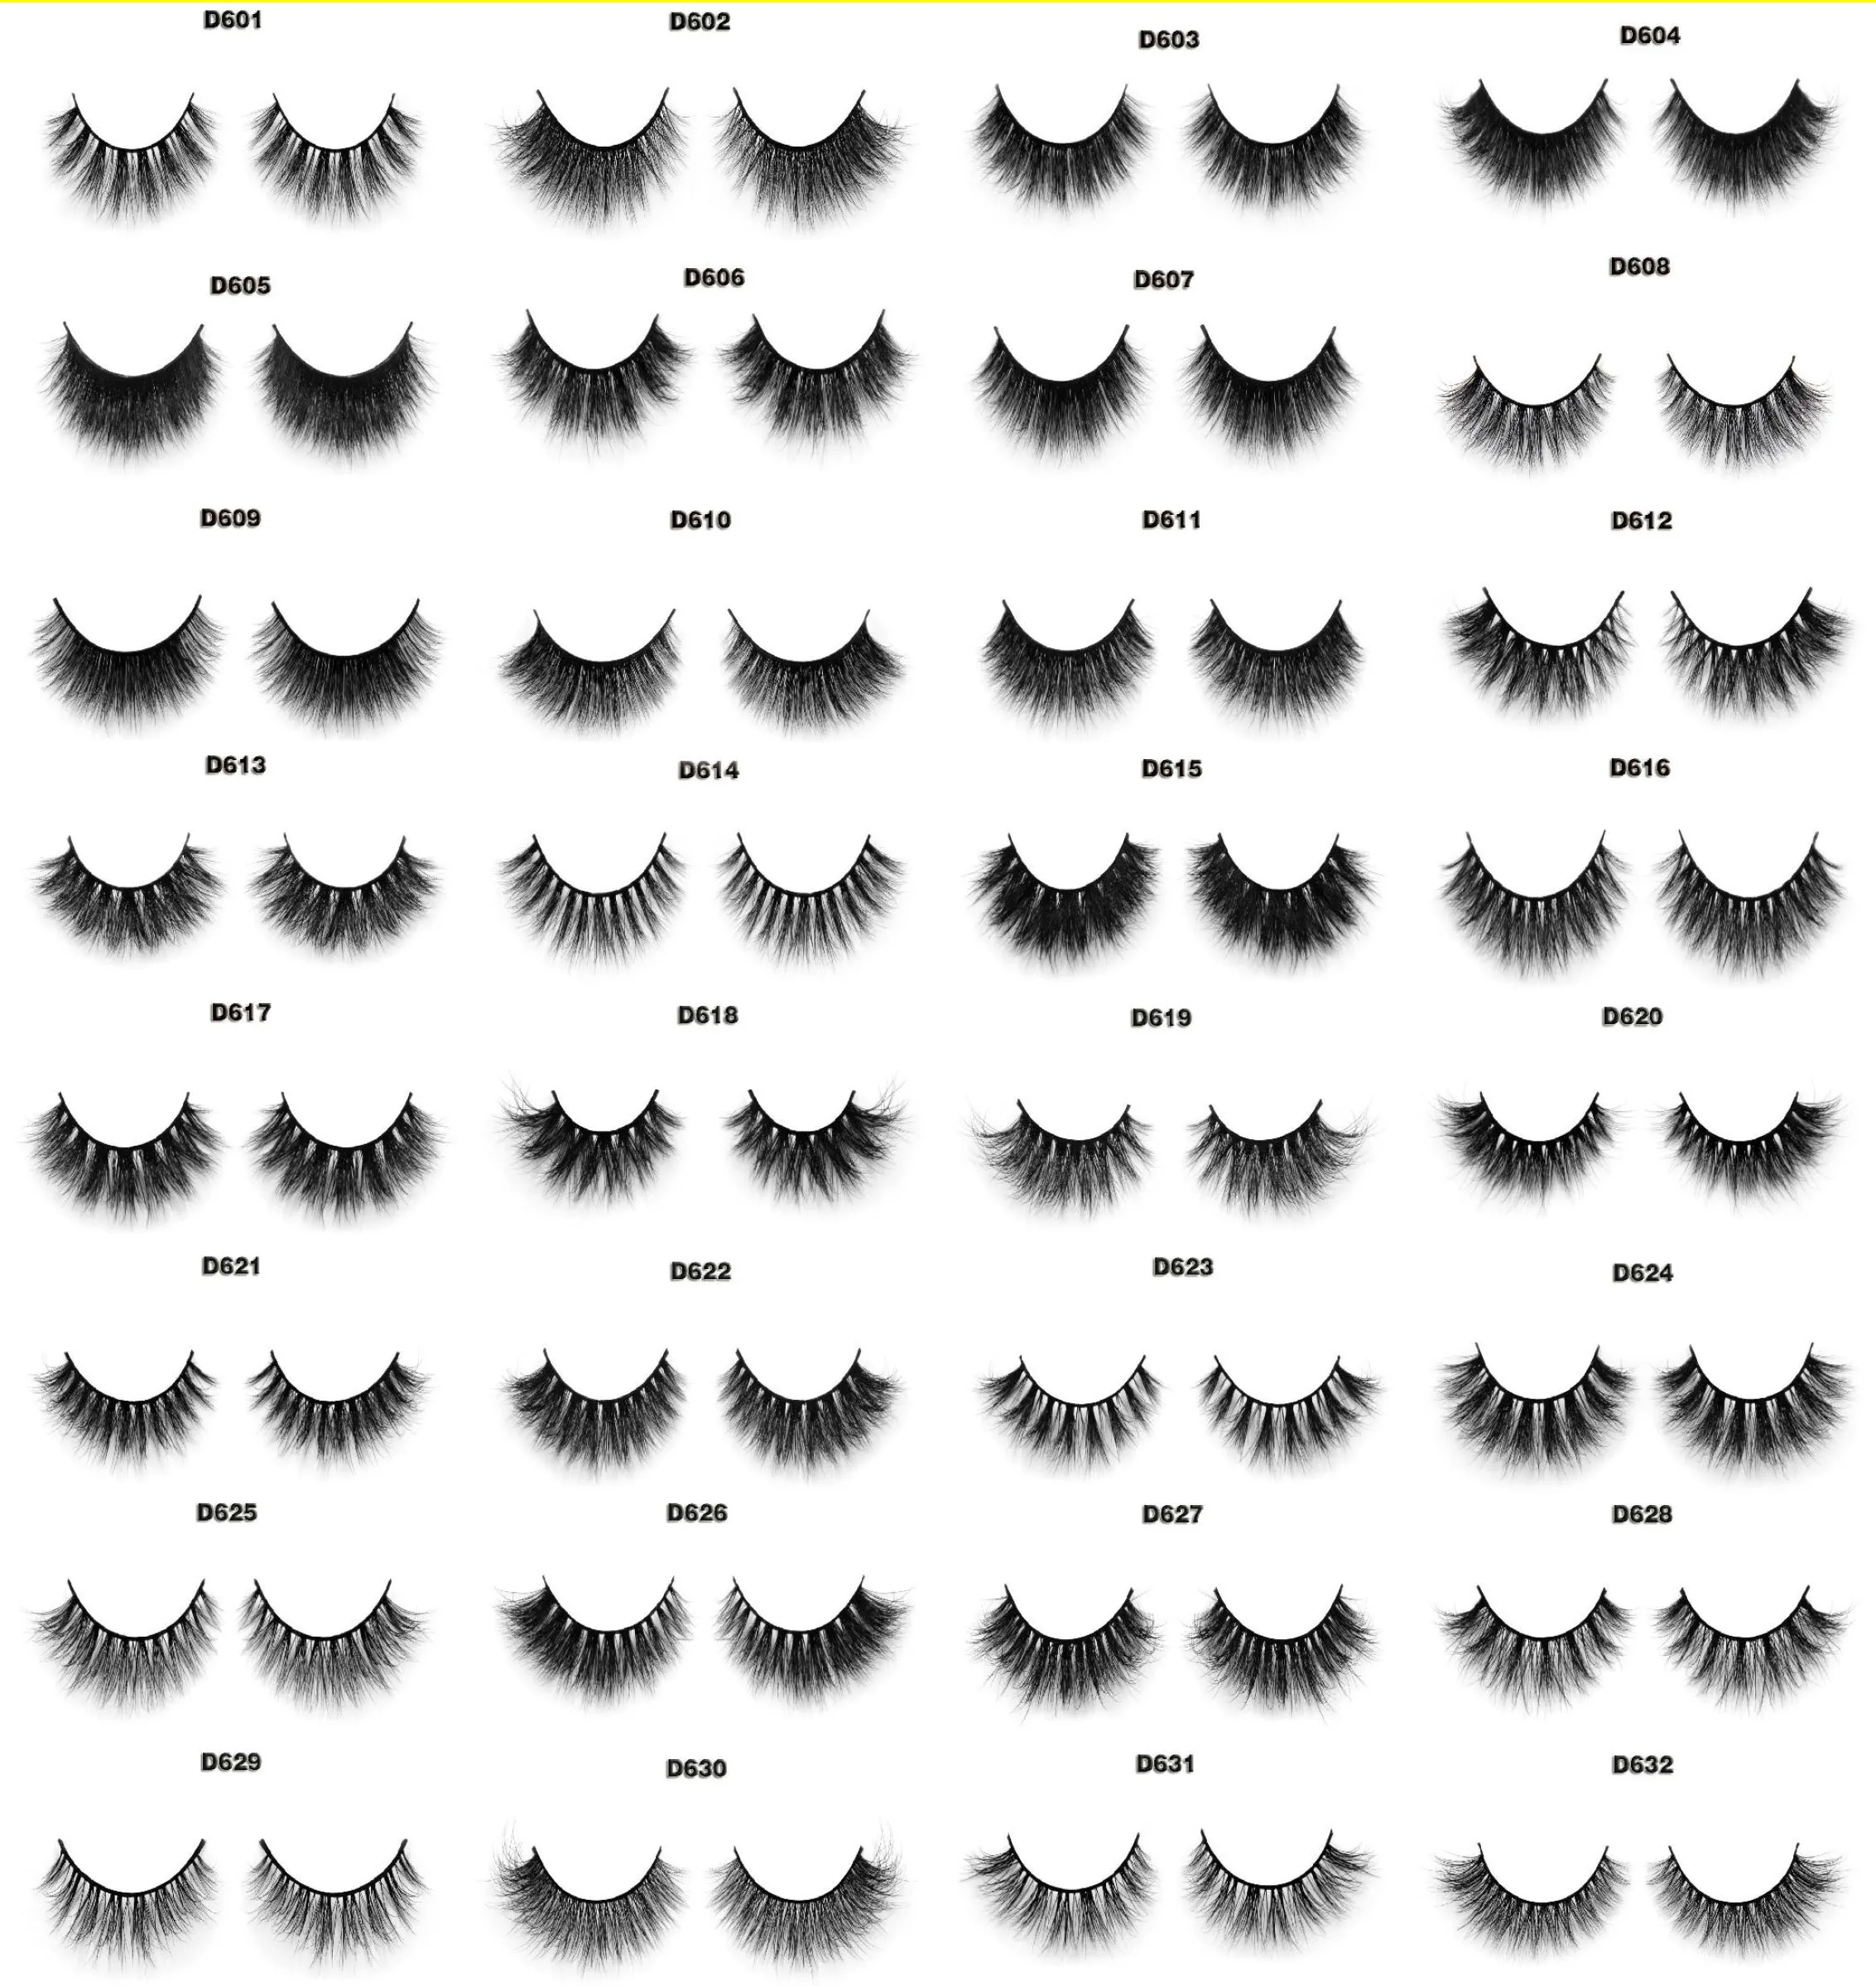 

Own Brand Premium Real Siberian Mink Lashes Eye Lashes Private Label Belle Mink Cotton Stalk Hand Made Full Strip Lashes Black